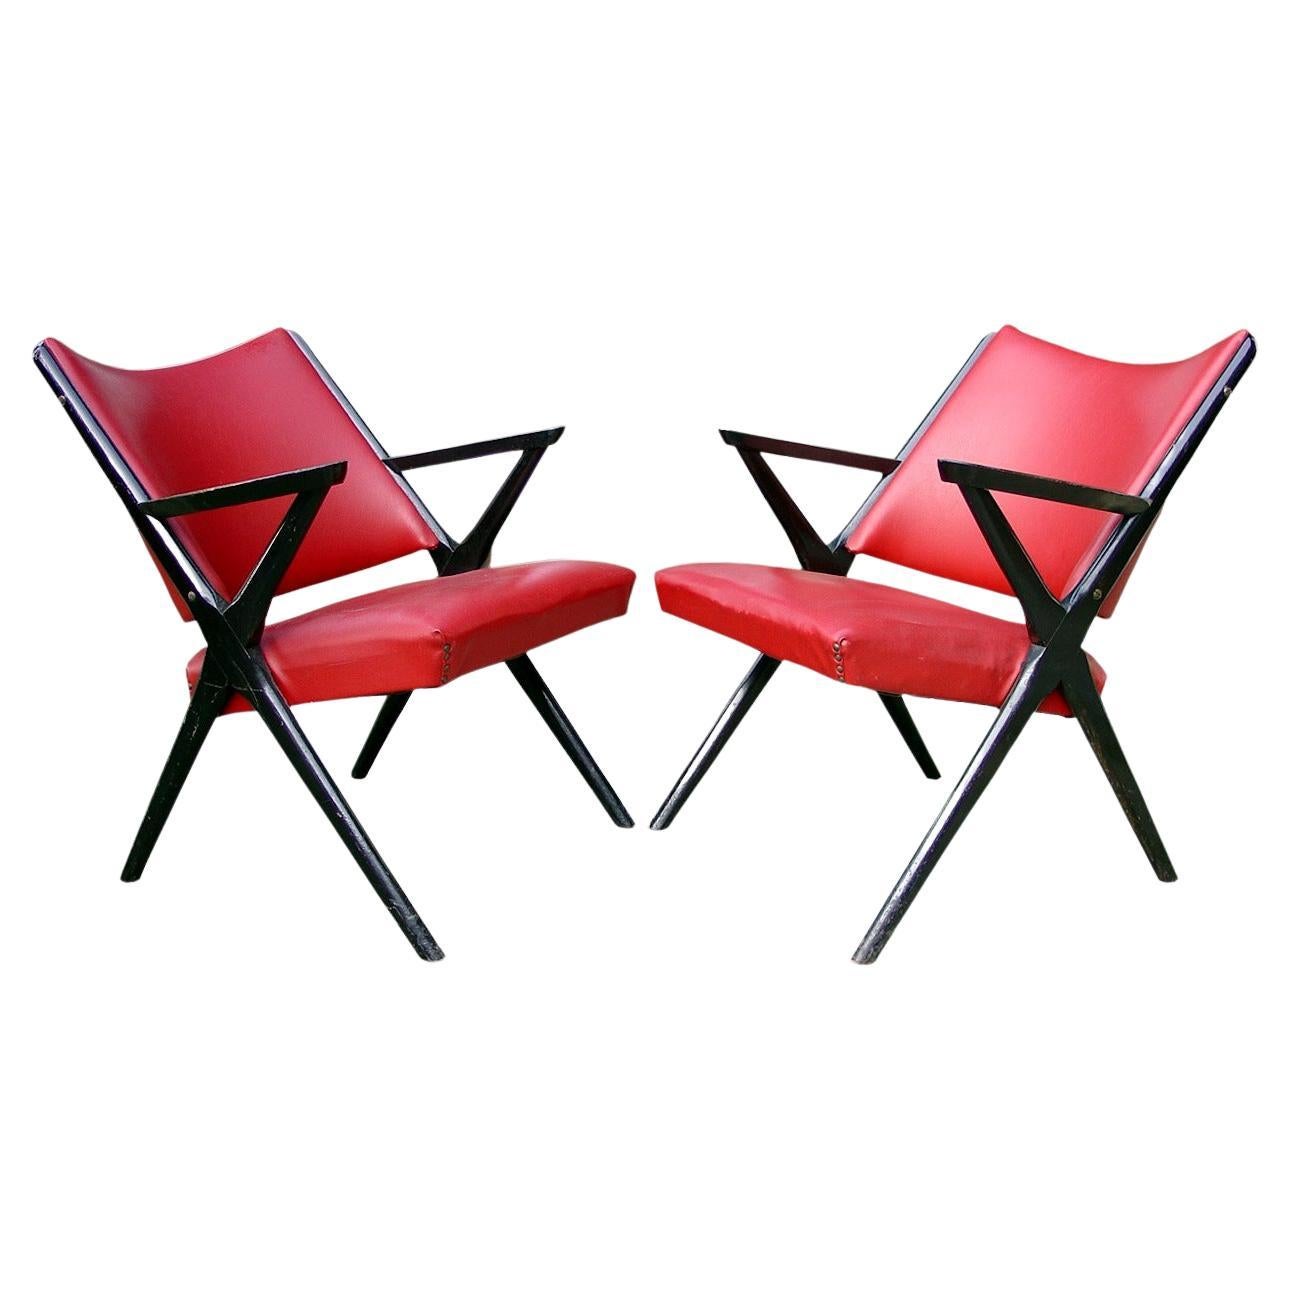 1960s Dal Vera Design Italy Arm Chairs- Set of 2